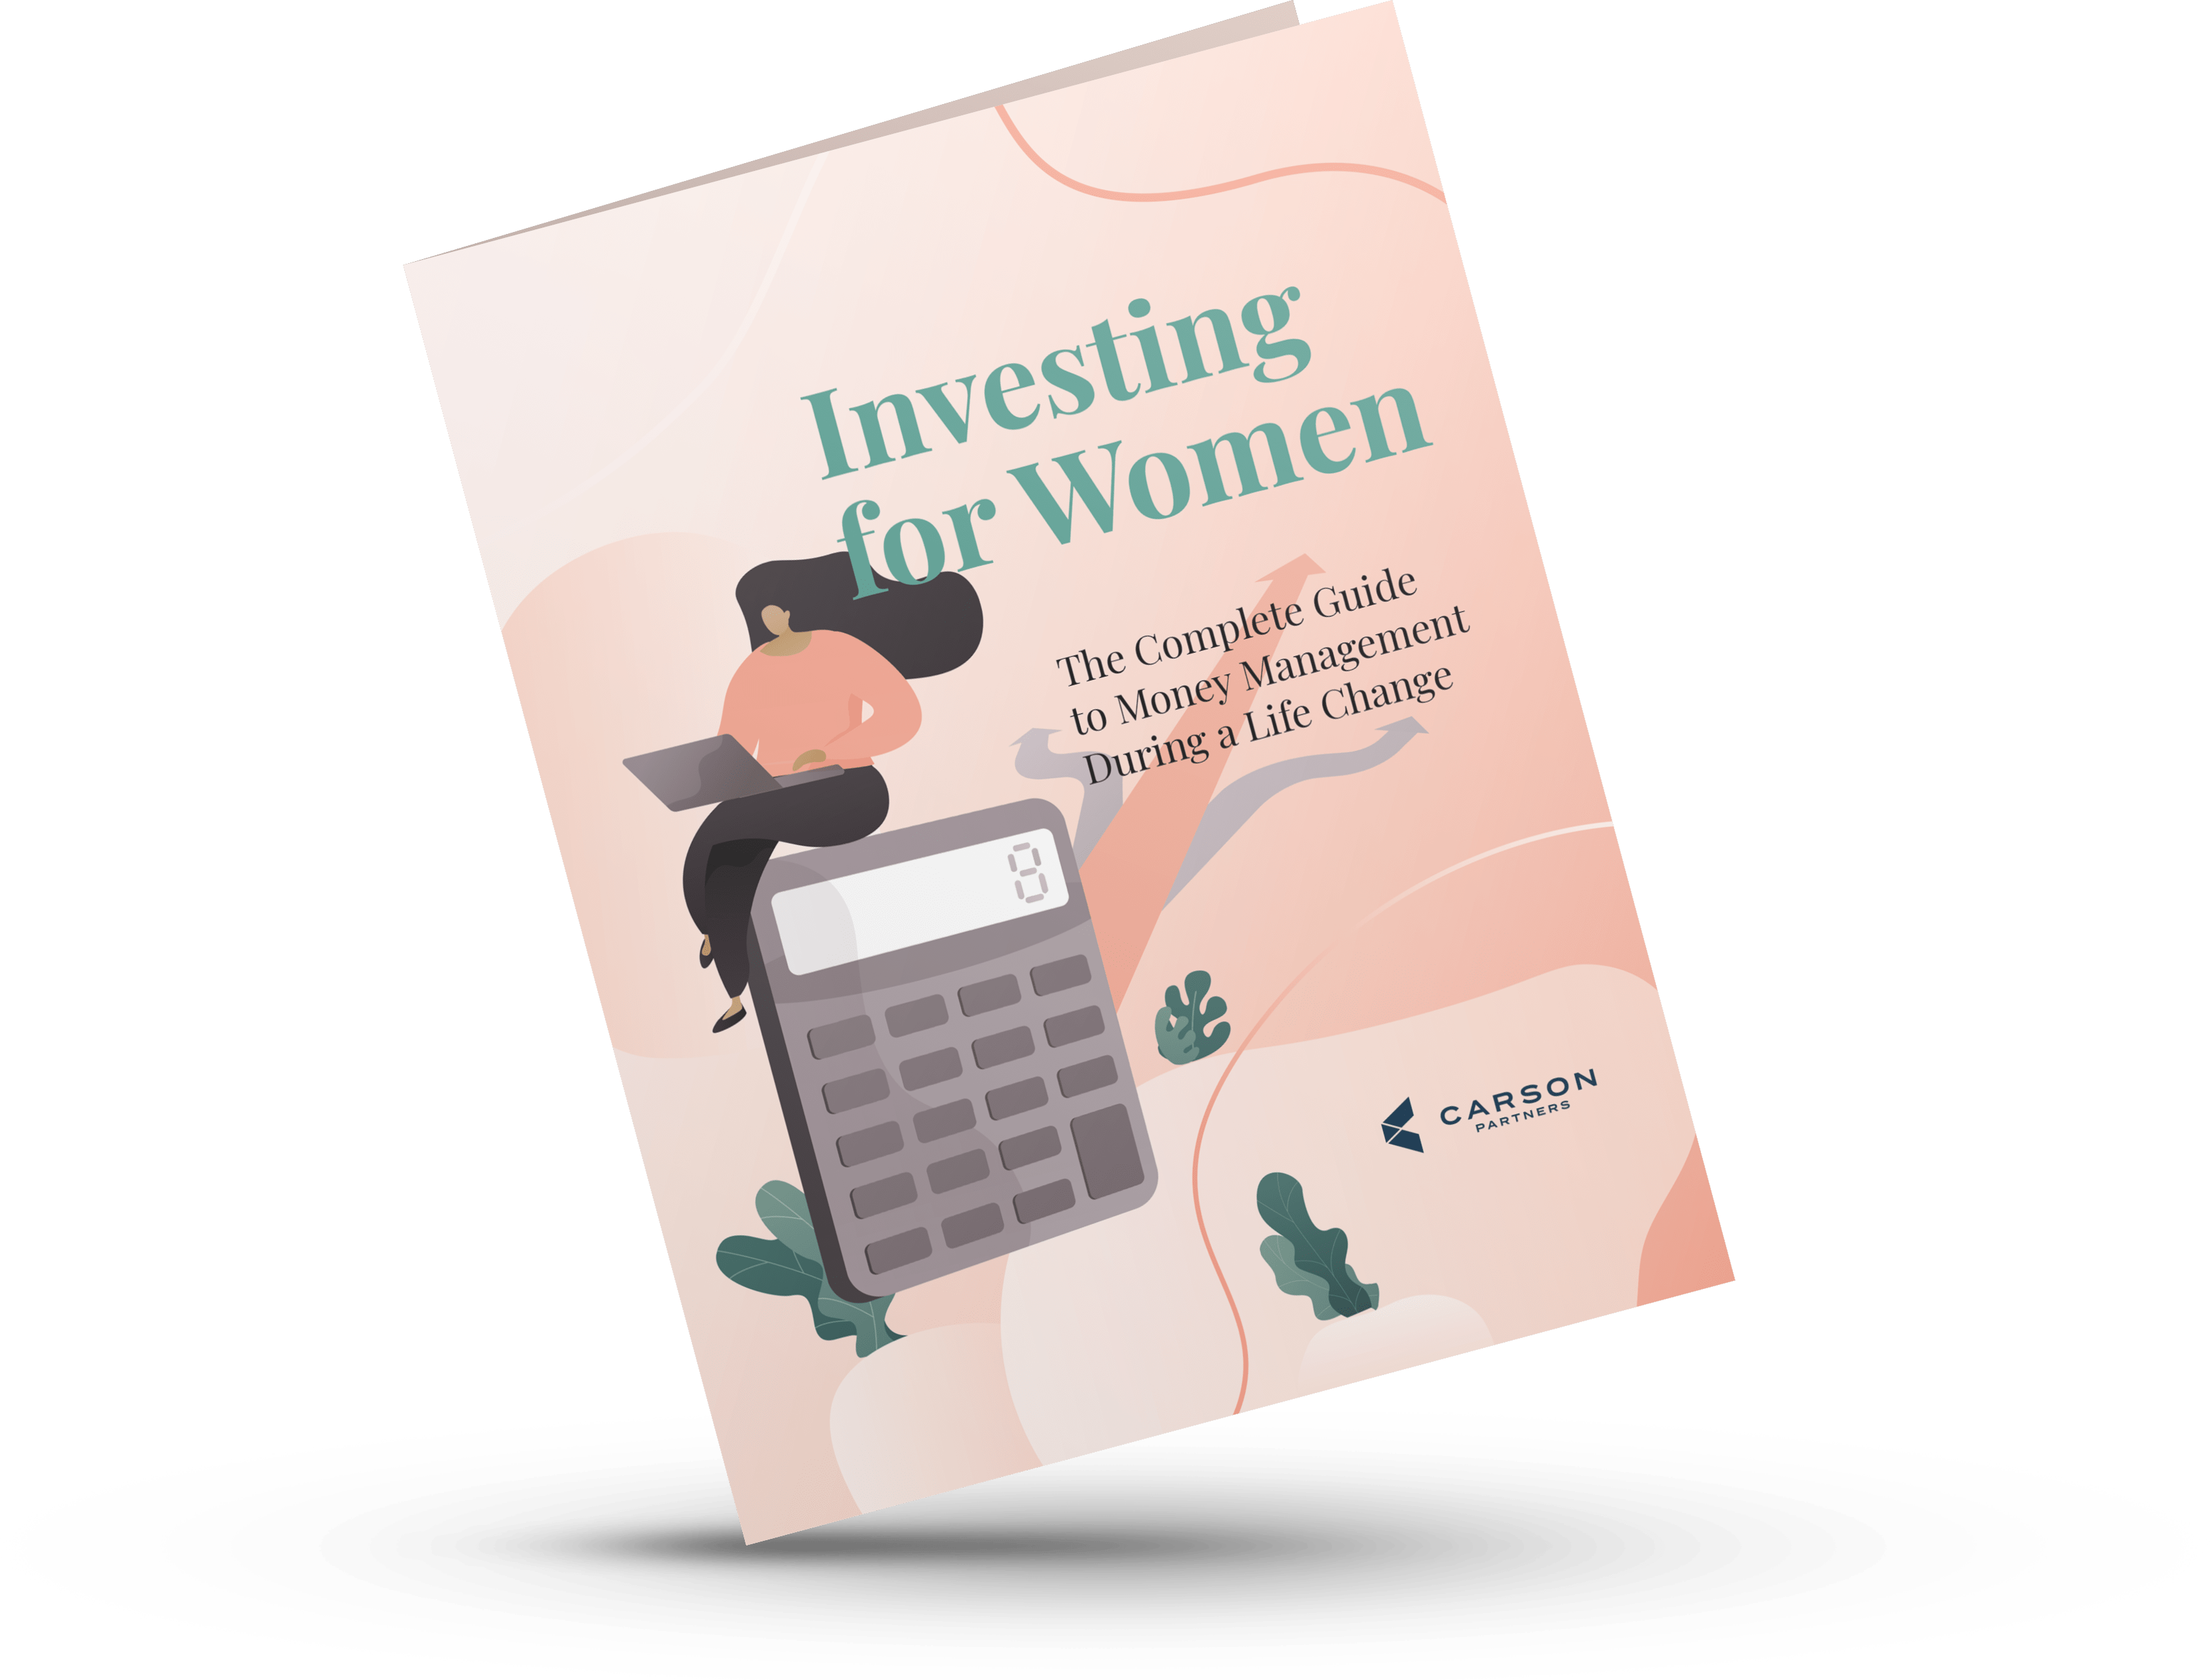 Investing for Women: The Complete Guide to Money Management During a Life Change